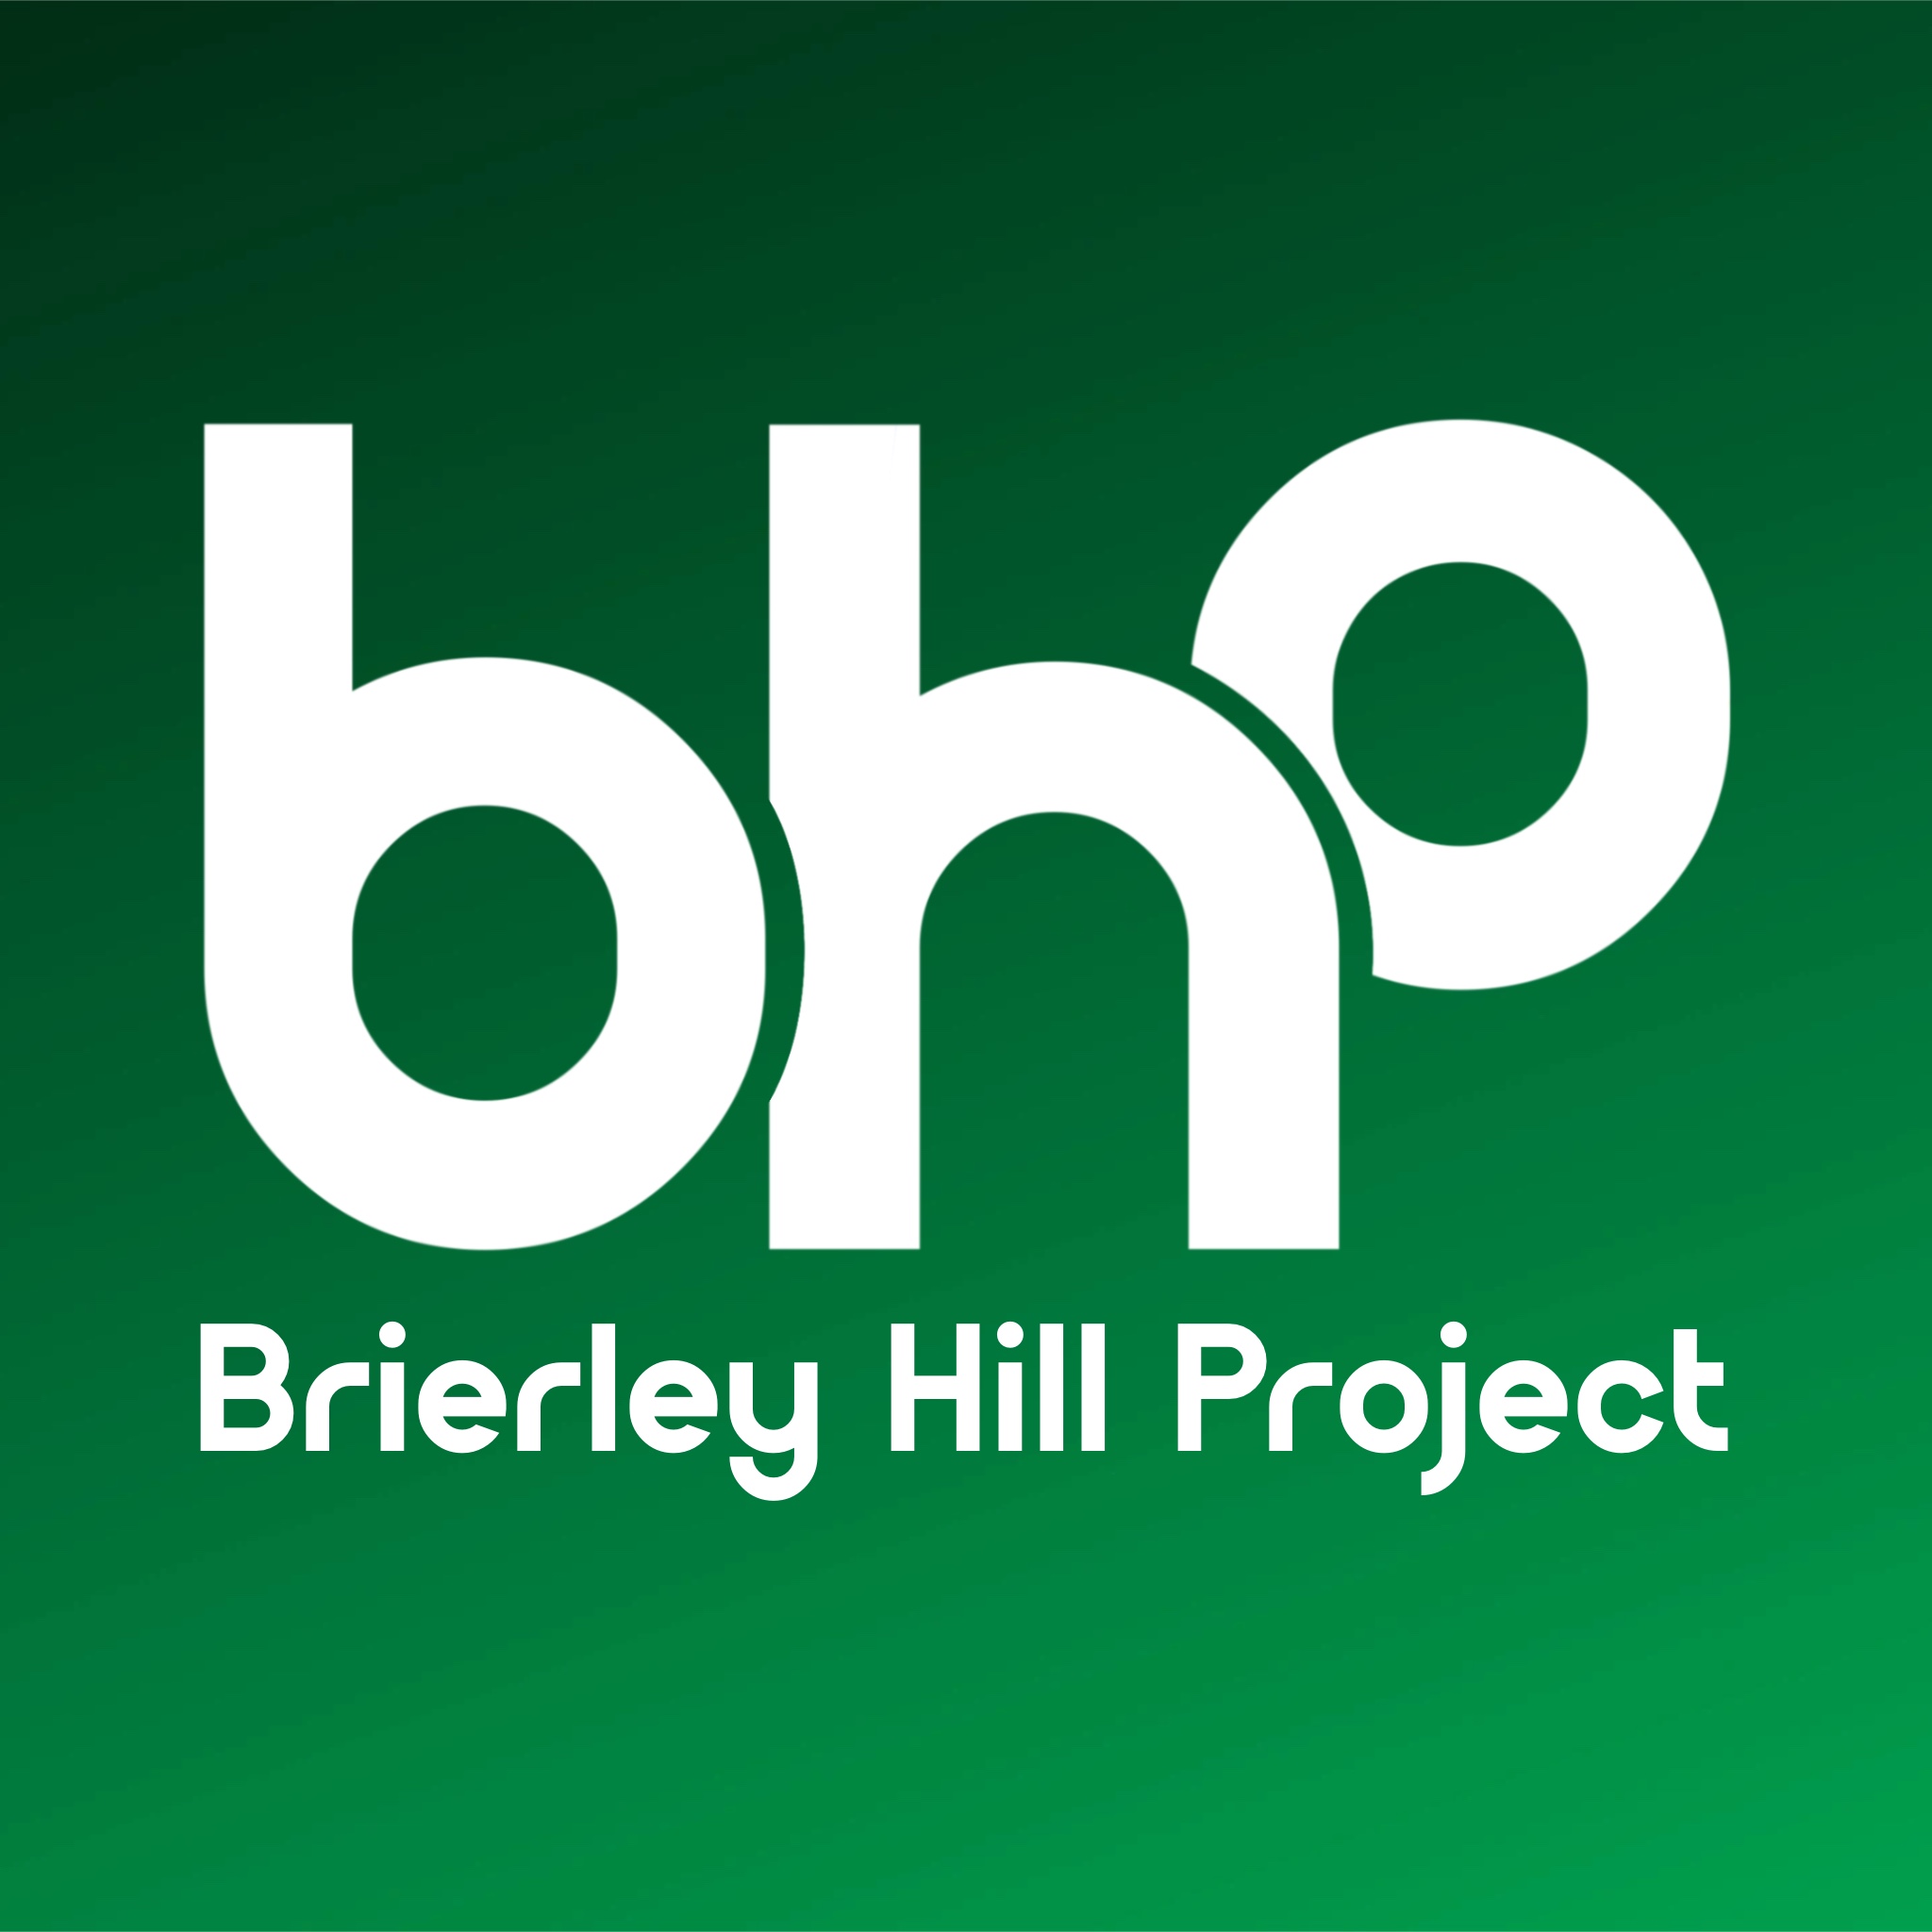 Brierley Hill Project